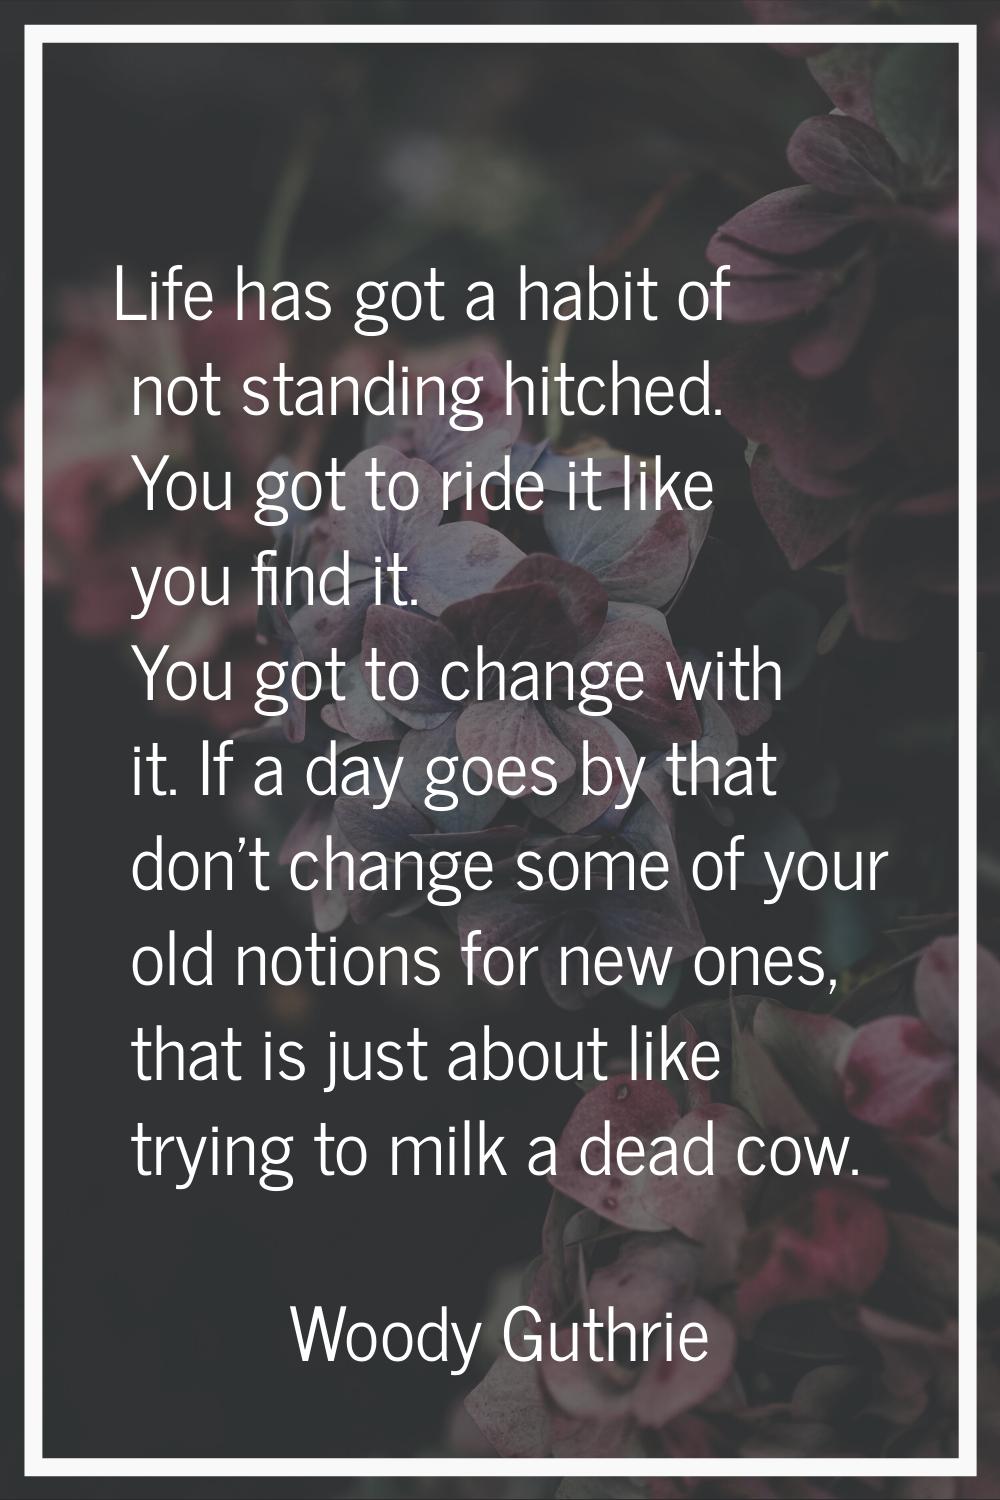 Life has got a habit of not standing hitched. You got to ride it like you find it. You got to chang